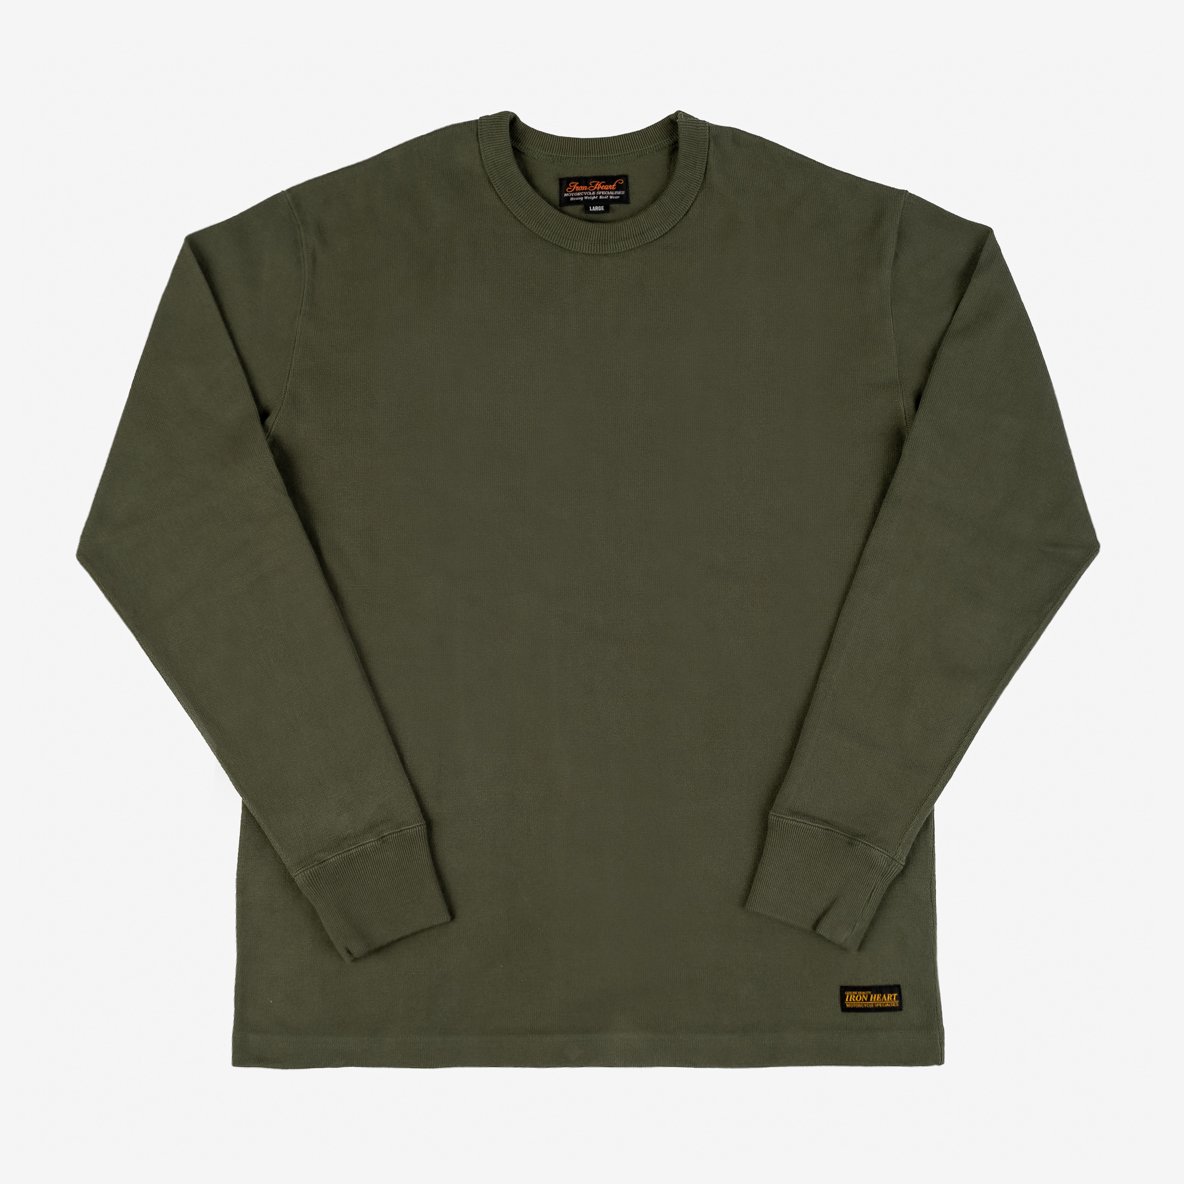 Iron Heart 11oz Cotton Knit Long Sleeved Crew Neck Sweater in oLIVE